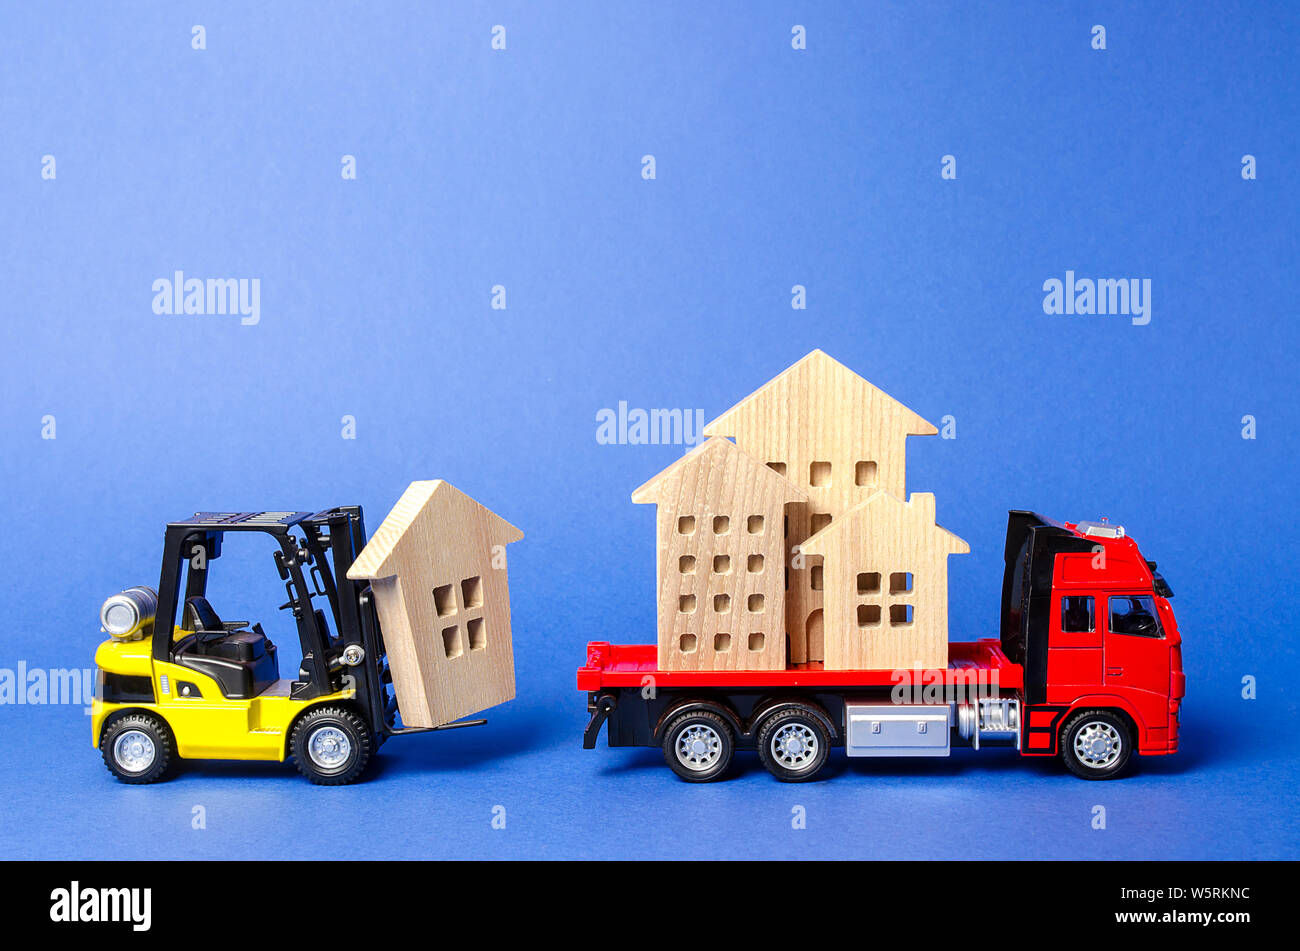 A yellow forklift loads a house figures on a red truck. Concept of transportation and cargo shipping, moving company. Construction of new houses and o Stock Photo